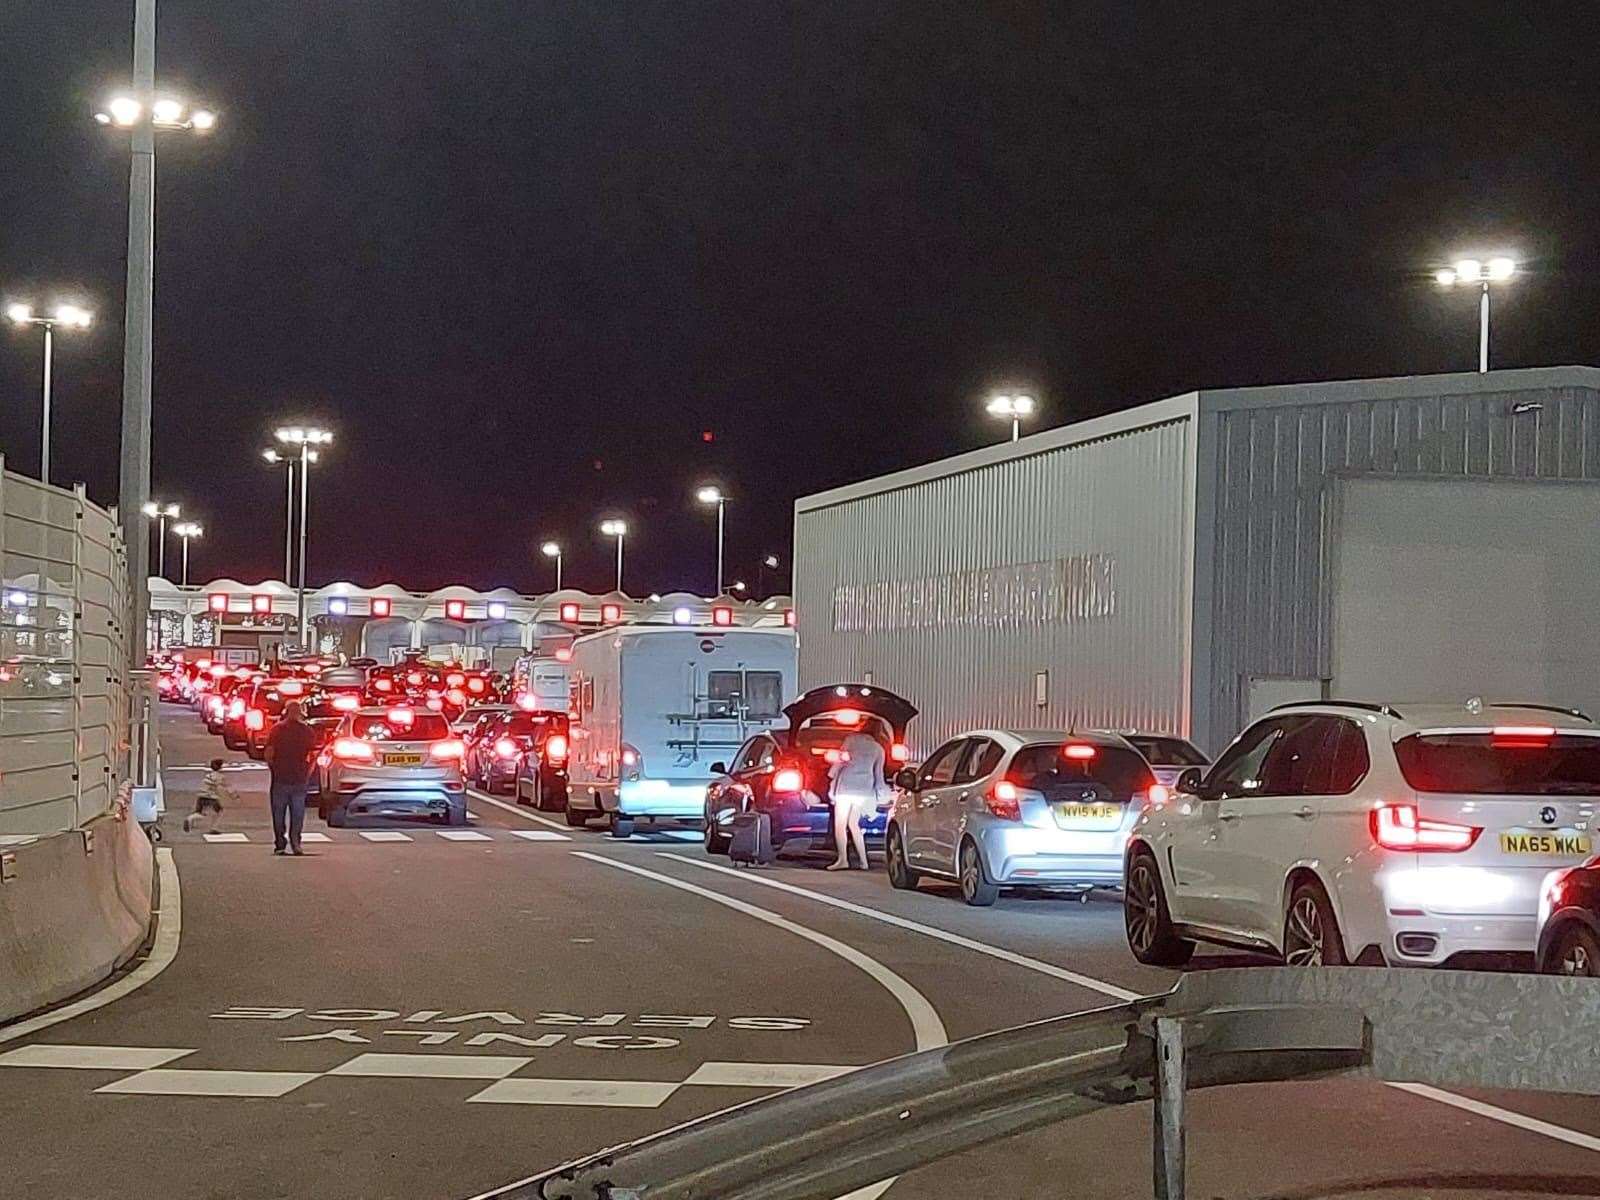 Delays at the border controls in Calais last week. Picture: @nonsocucinare on Twitter